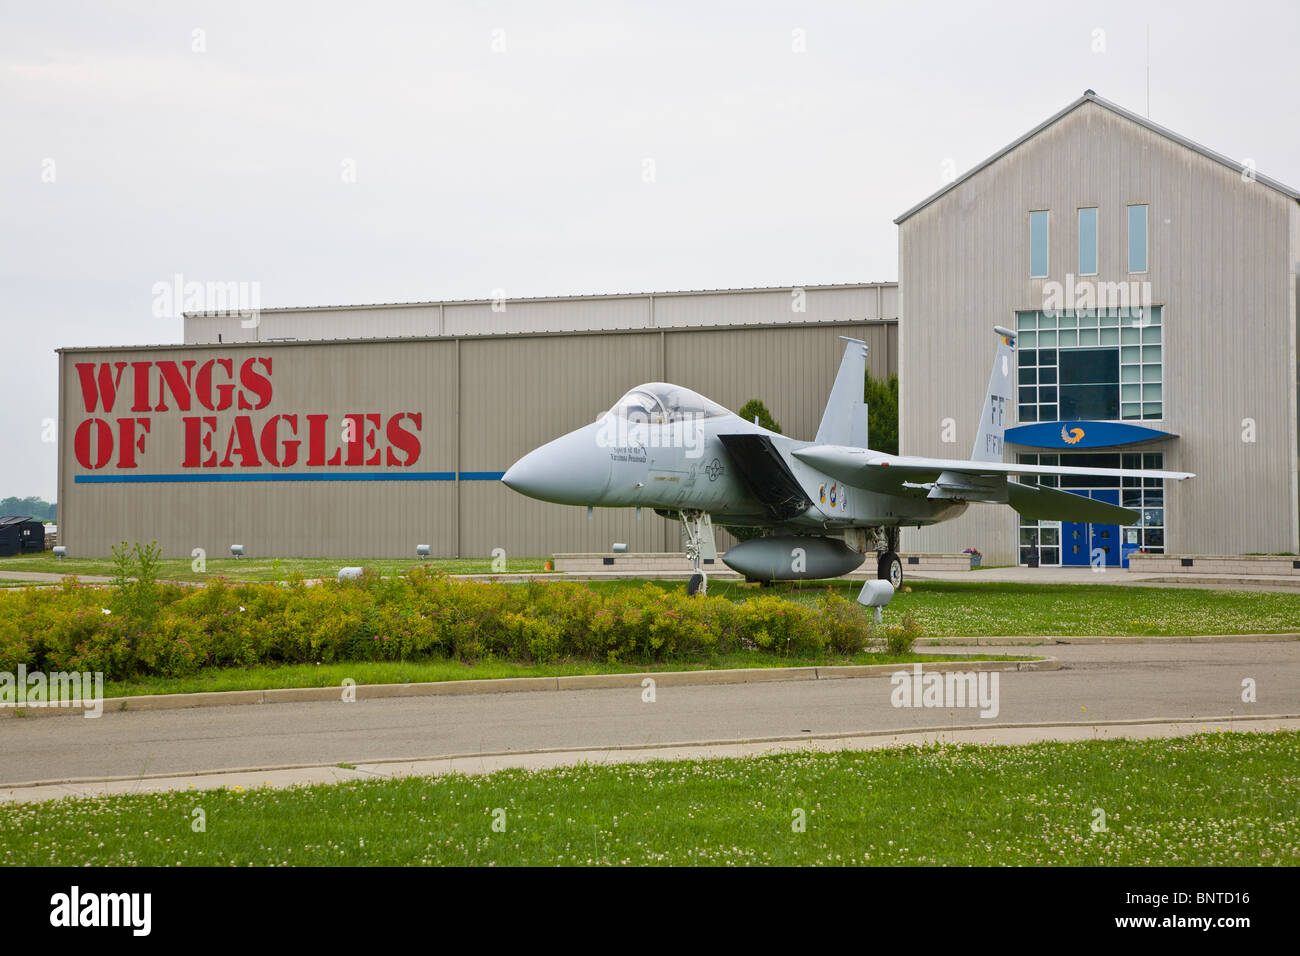 Entrance to Wings of Eagles Warplane Museum in Elmira New York Stock Photo